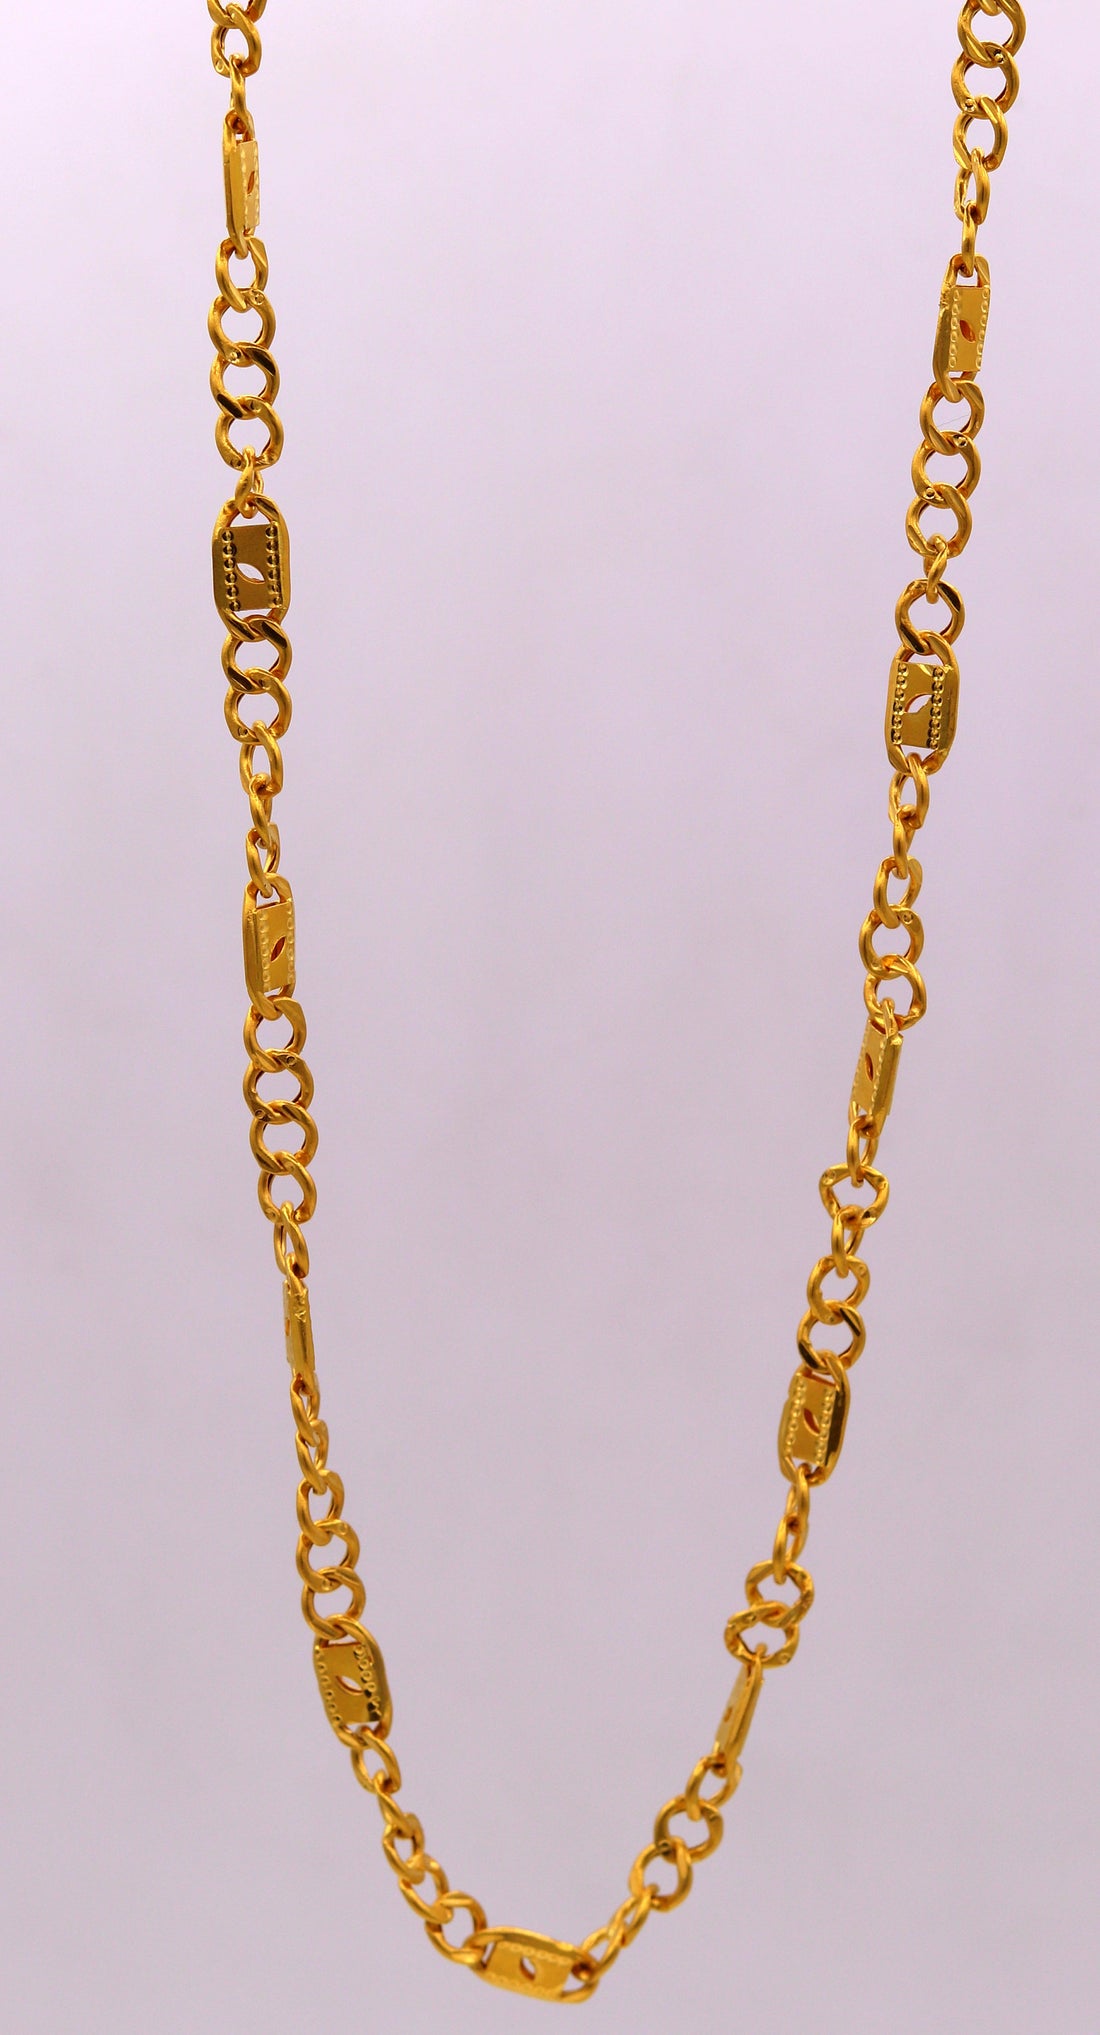 22k yellow gold handmade 18 inches link figaro chain men's women's unisex necklace gorgeous nawabi chain desigh - TRIBAL ORNAMENTS